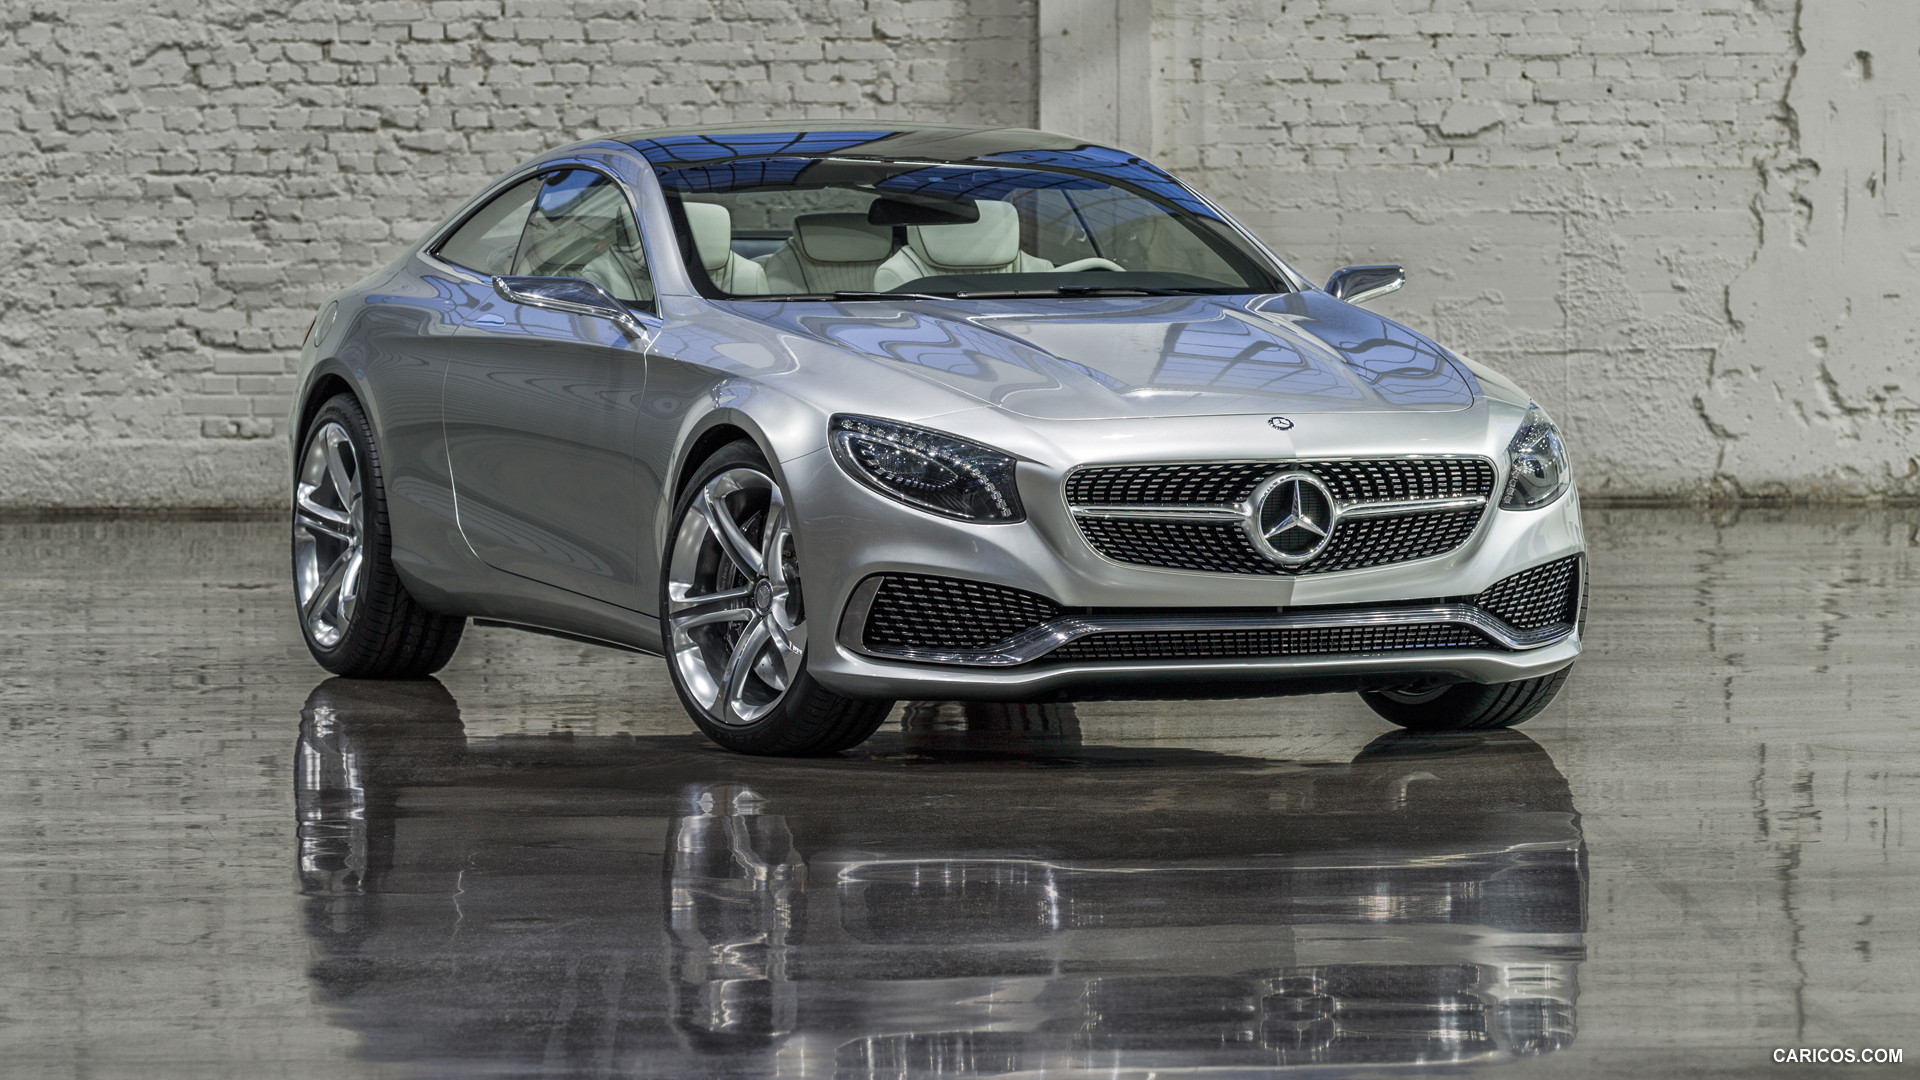 Mercedes-Benz S-Class Coupe Concept (2013)  - Front, #23 of 58